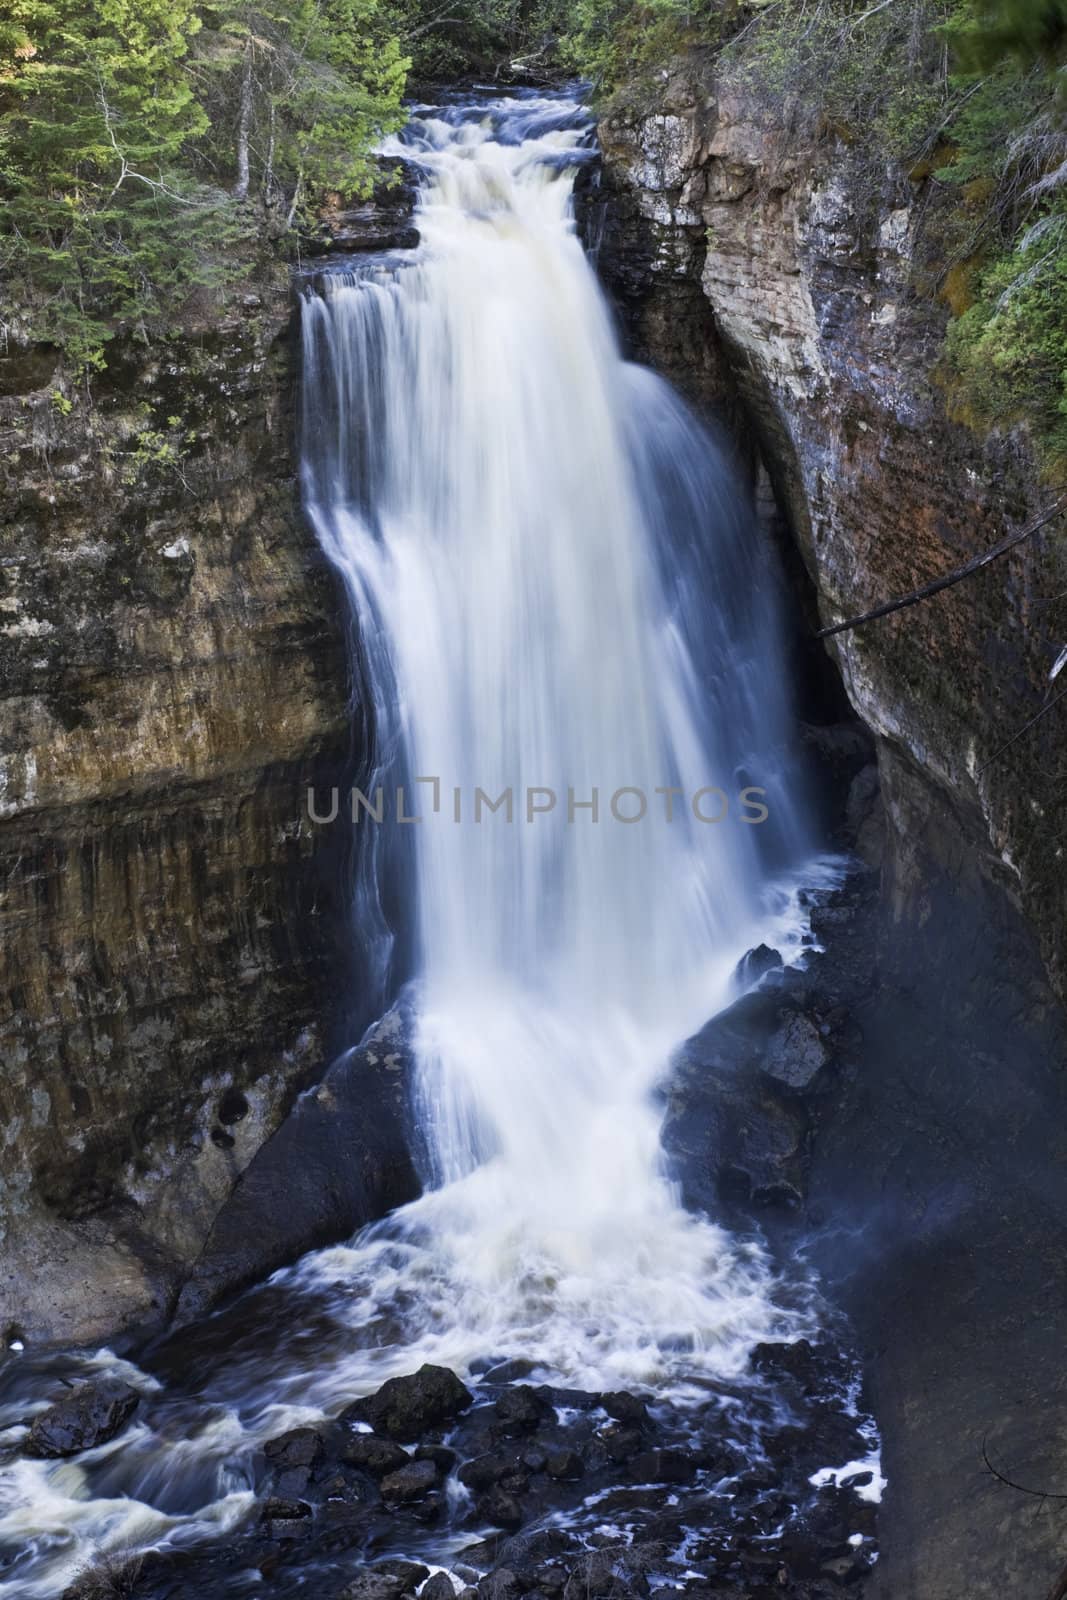 Miners Falls - Pictured Rocks National Lakeshore